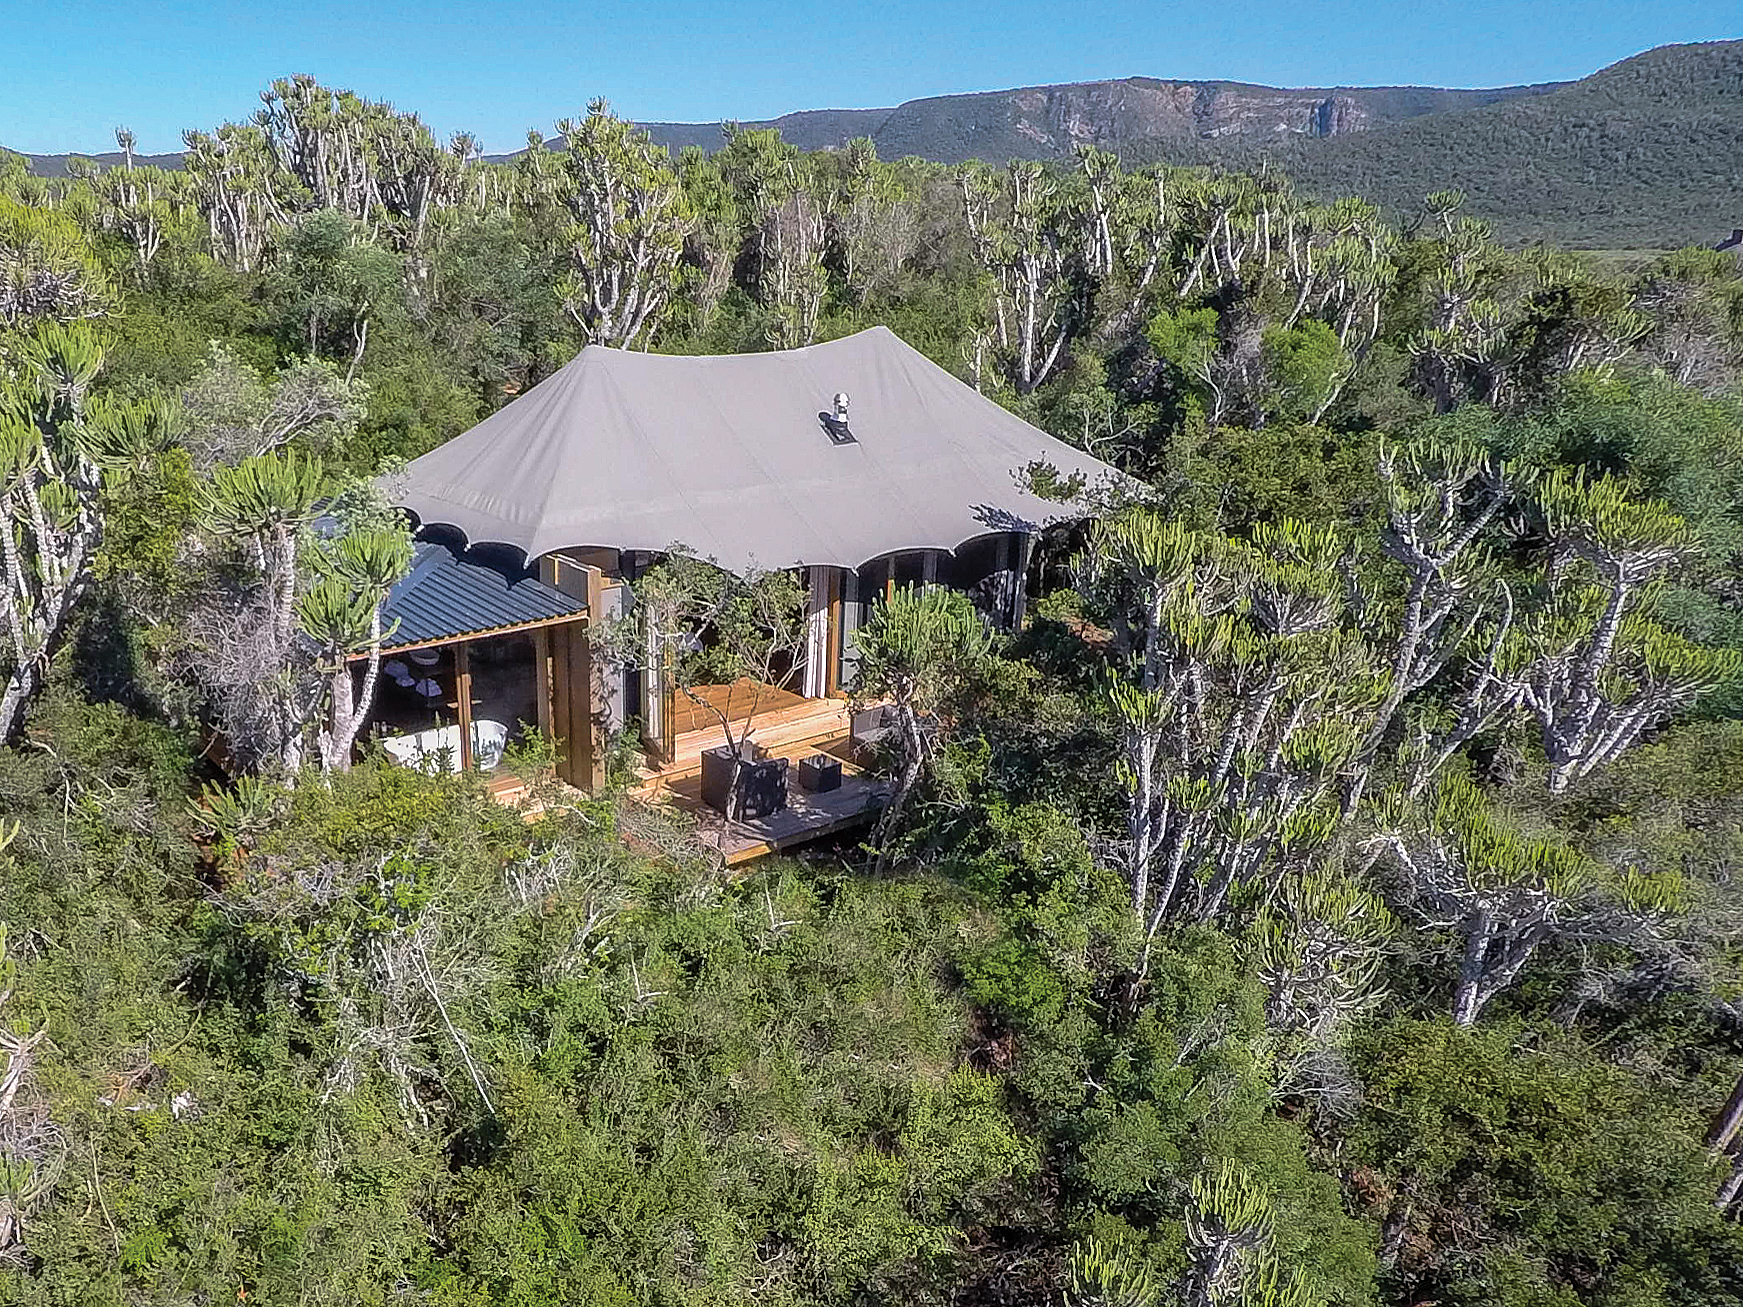 Kariega Settlers Drift suites are secluded and private